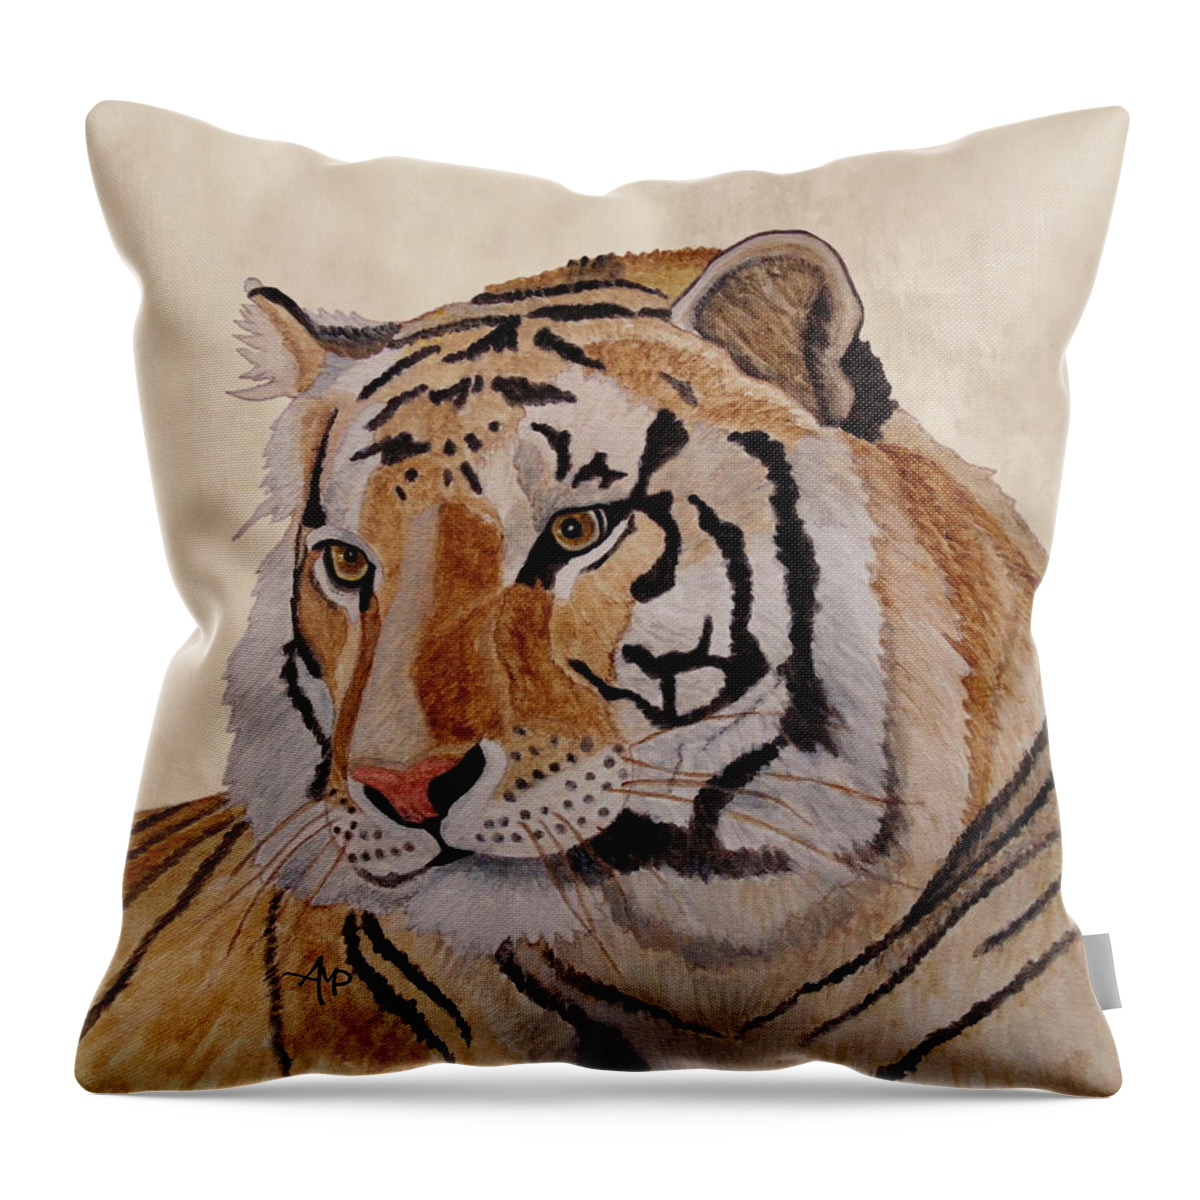 Tiger Throw Pillow featuring the painting Bengal Tiger by Angeles M Pomata